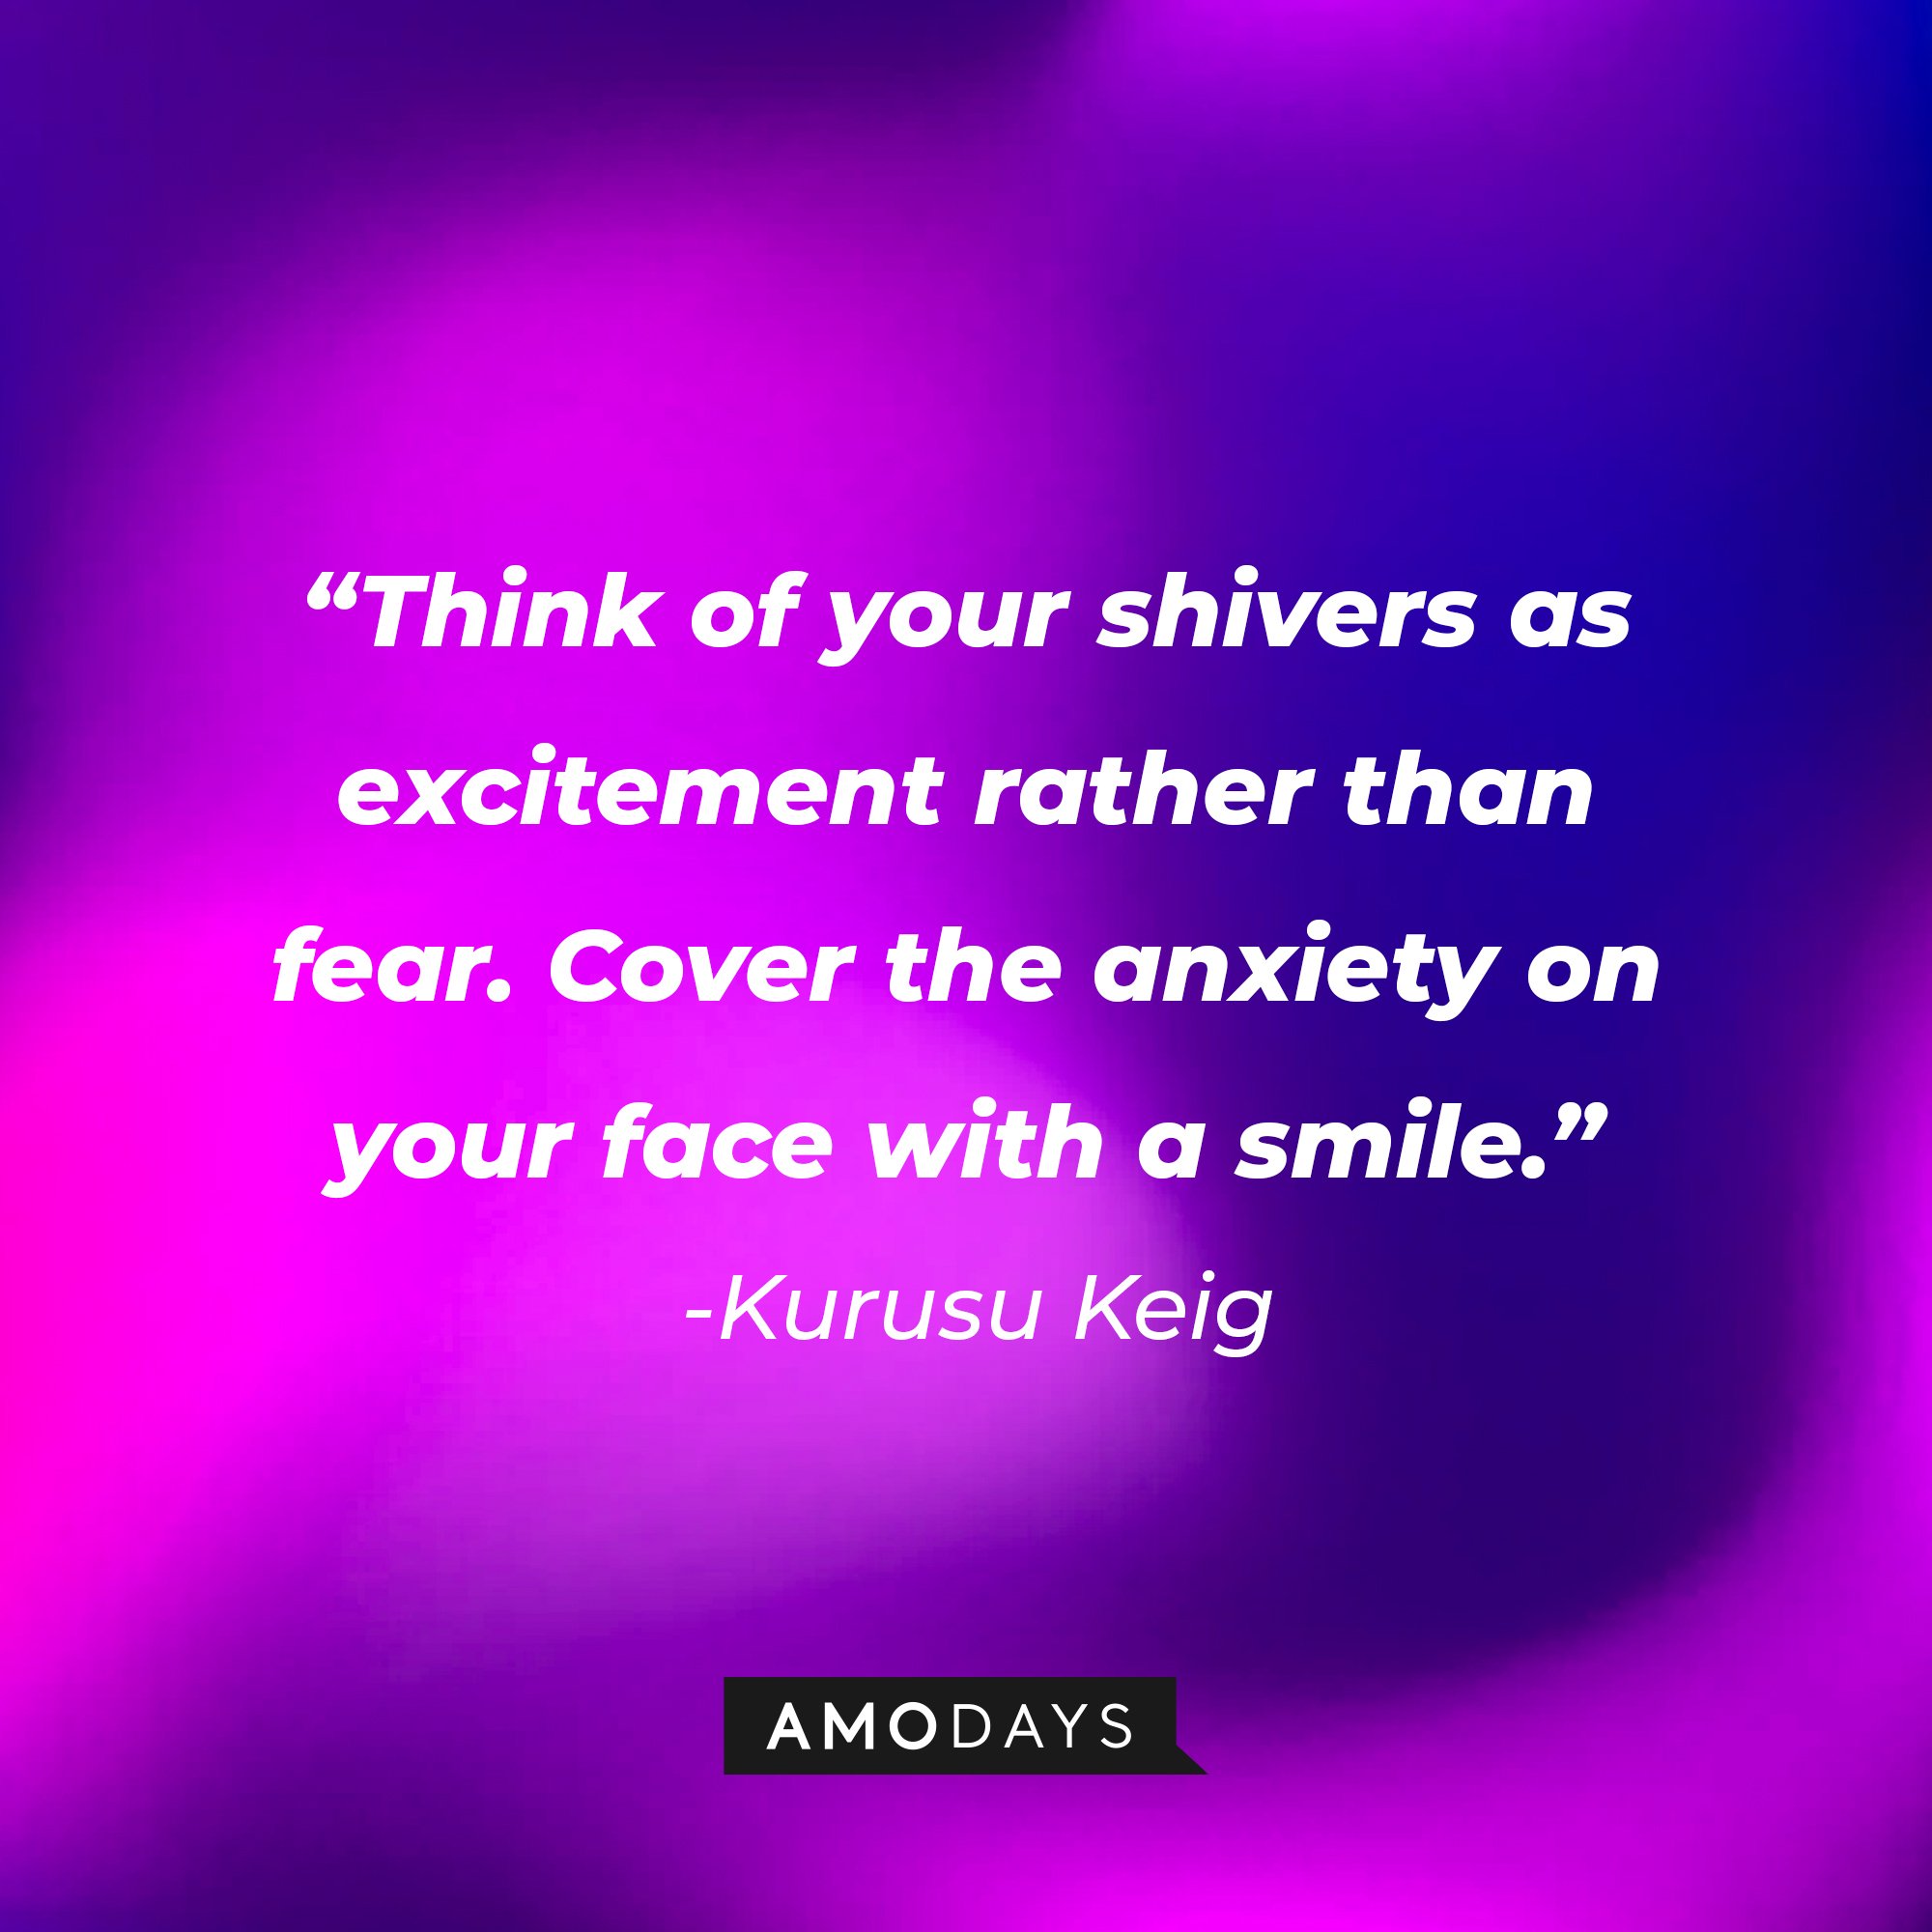  Kurusu Keig’s quote “Think of your shivers as excitement rather than fear. Cover the anxiety on your face with a smile.” | Image: AmoDays  